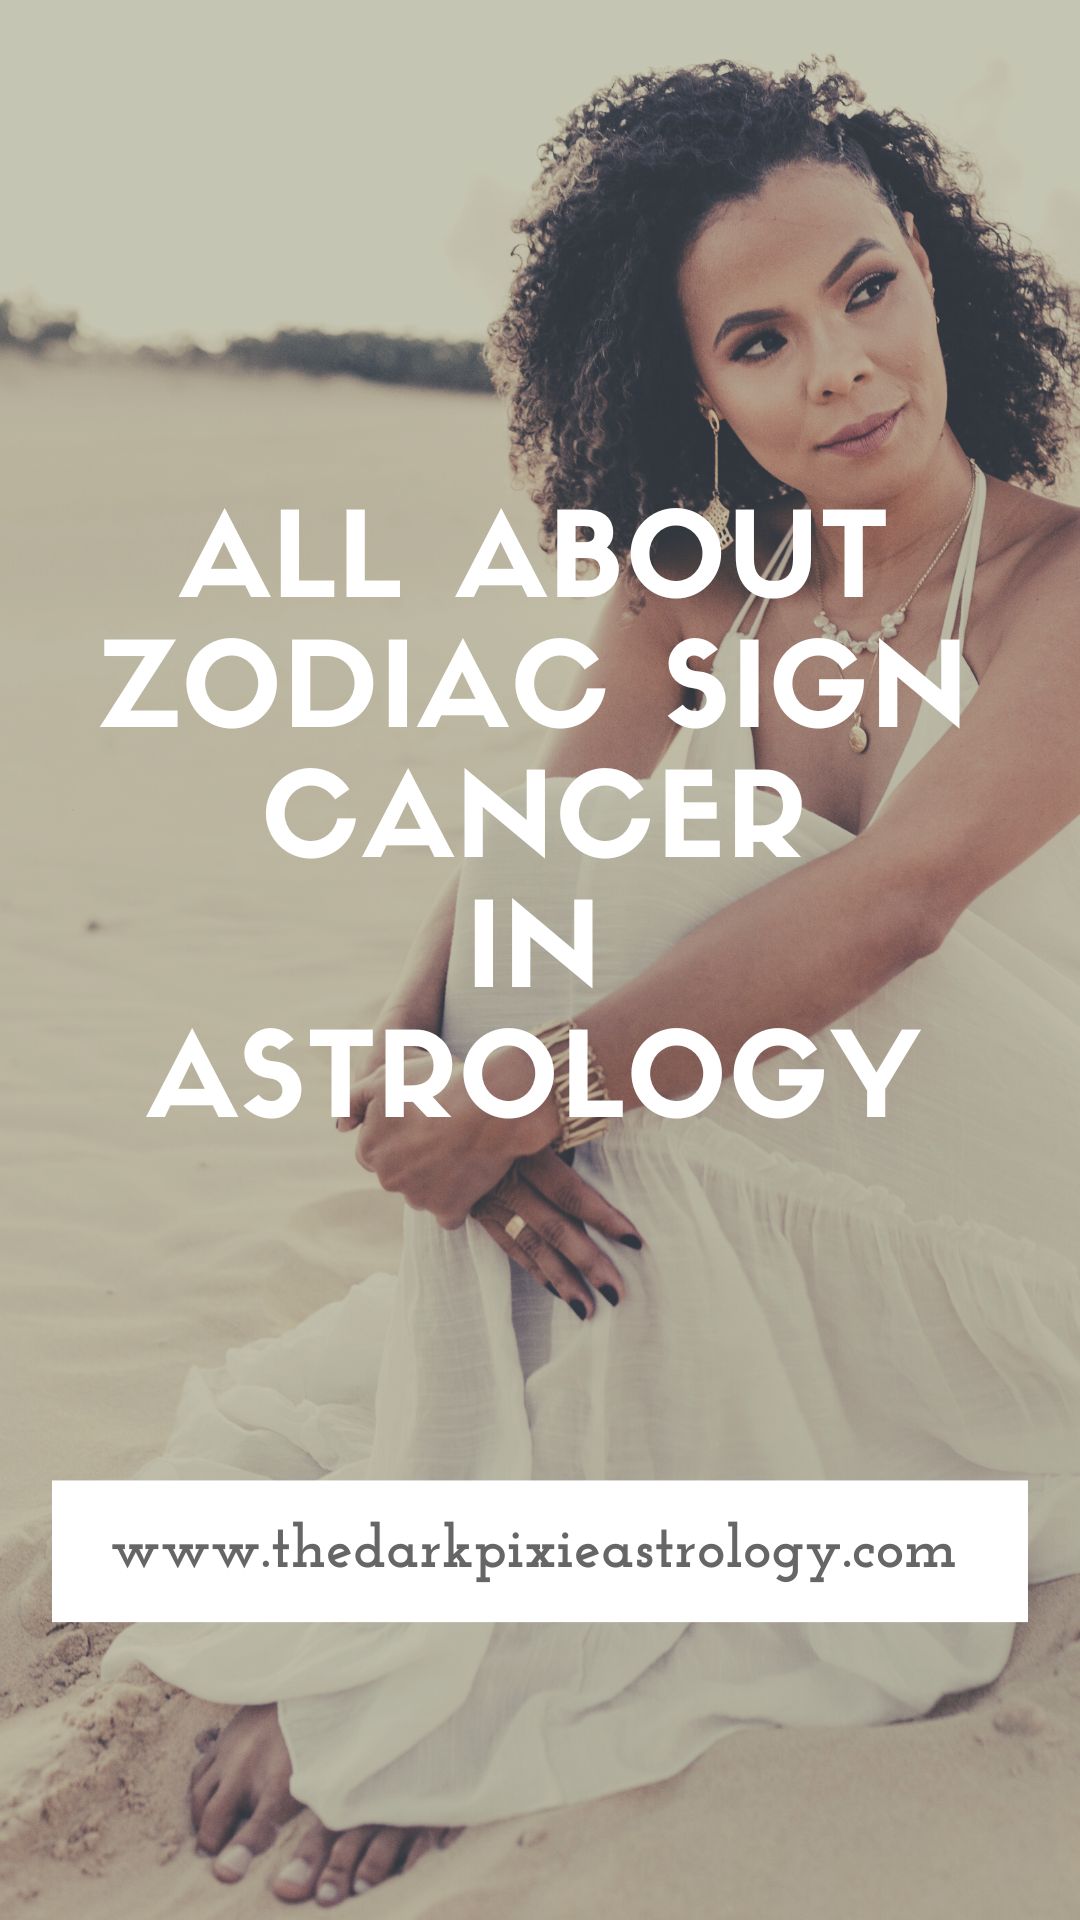 All About Zodiac Sign Cancer in Astrology - The Dark Pixie Astrology